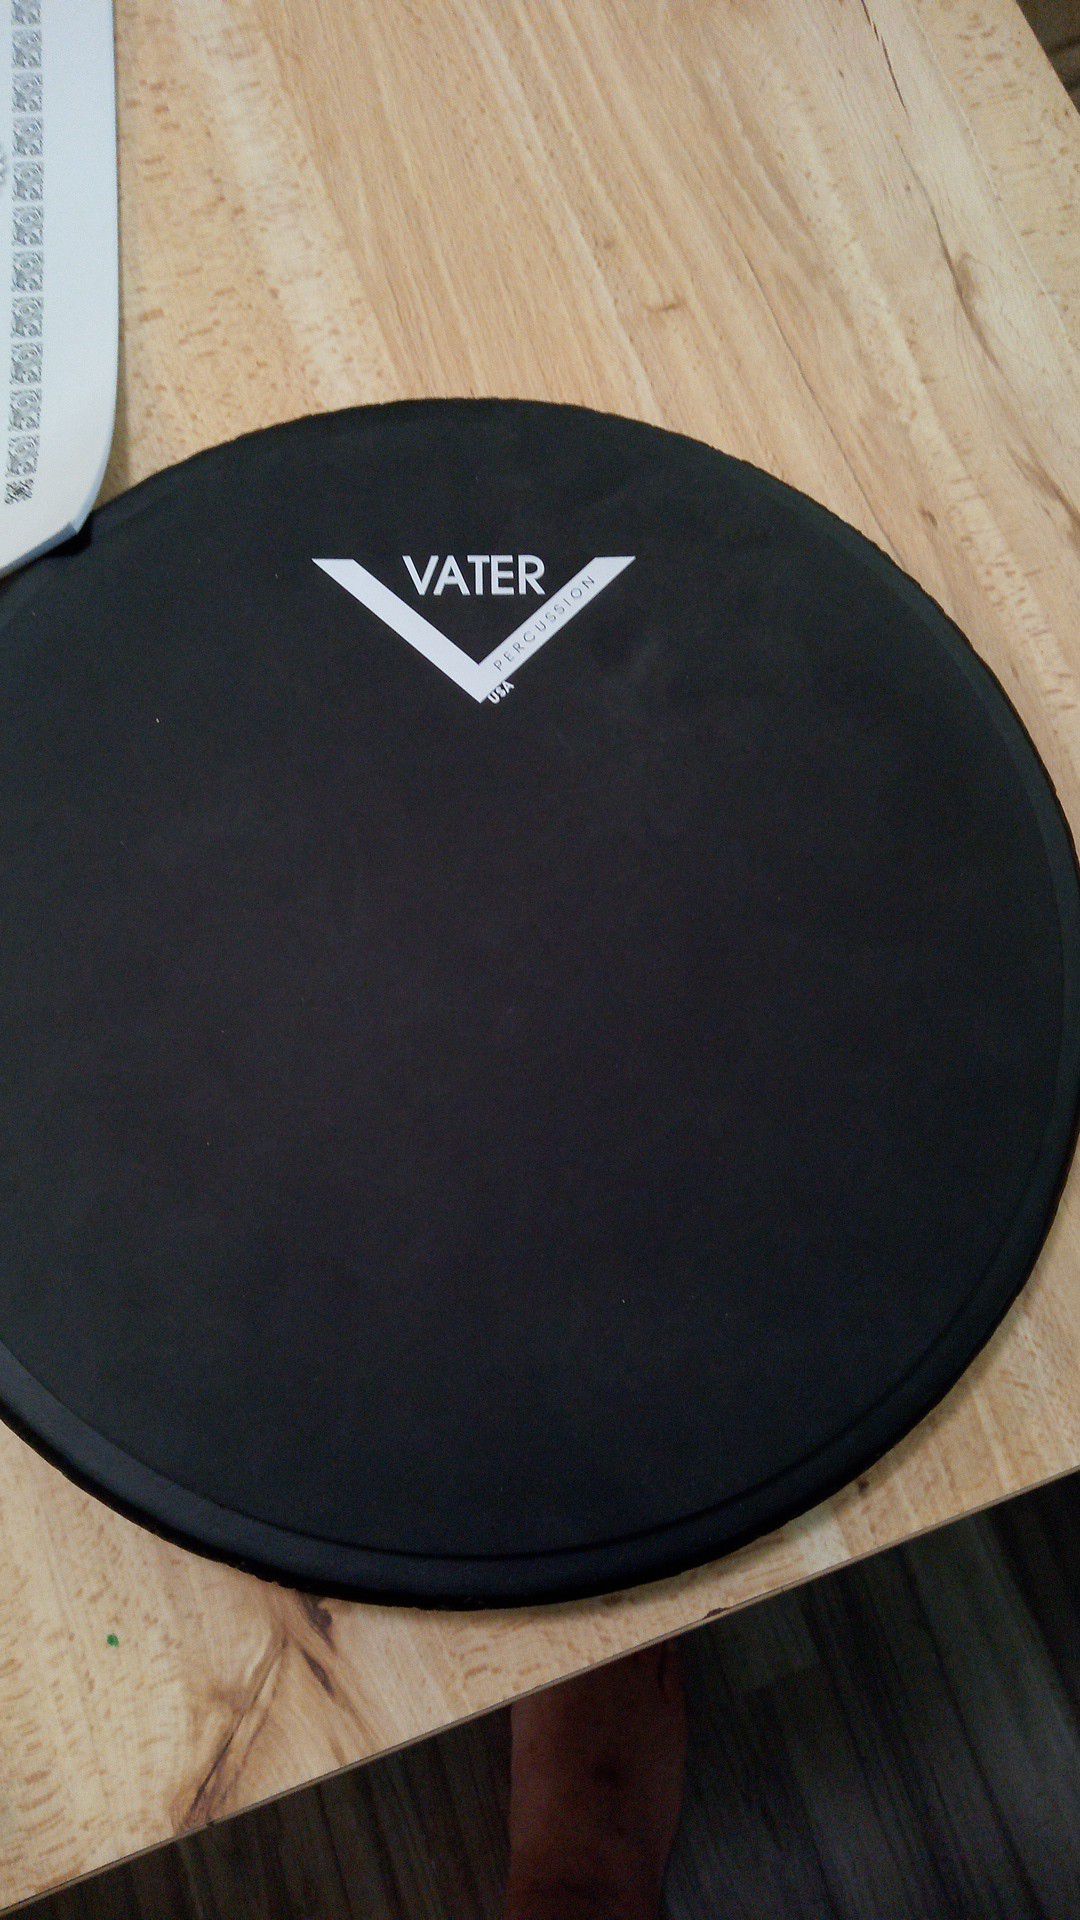 Vater snare drum practice pad drum sticks and stick control book marching band drummer drum practice